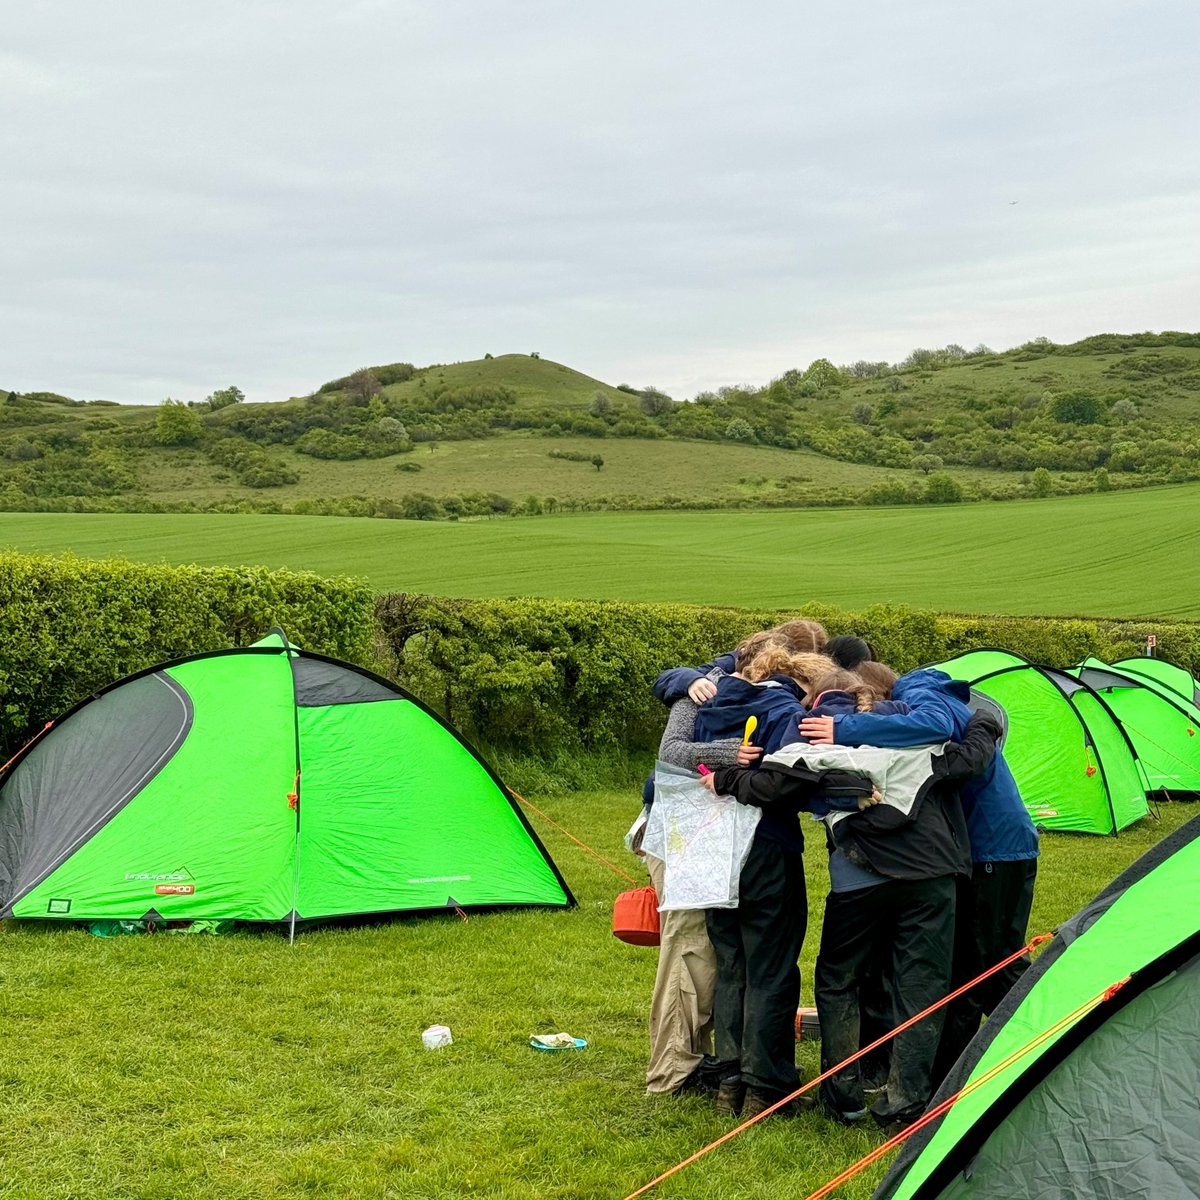 Over 50 pupils tackled their @DofE Silver practice expedition in the Chilterns over the long weekend. #commitment #openingdoors